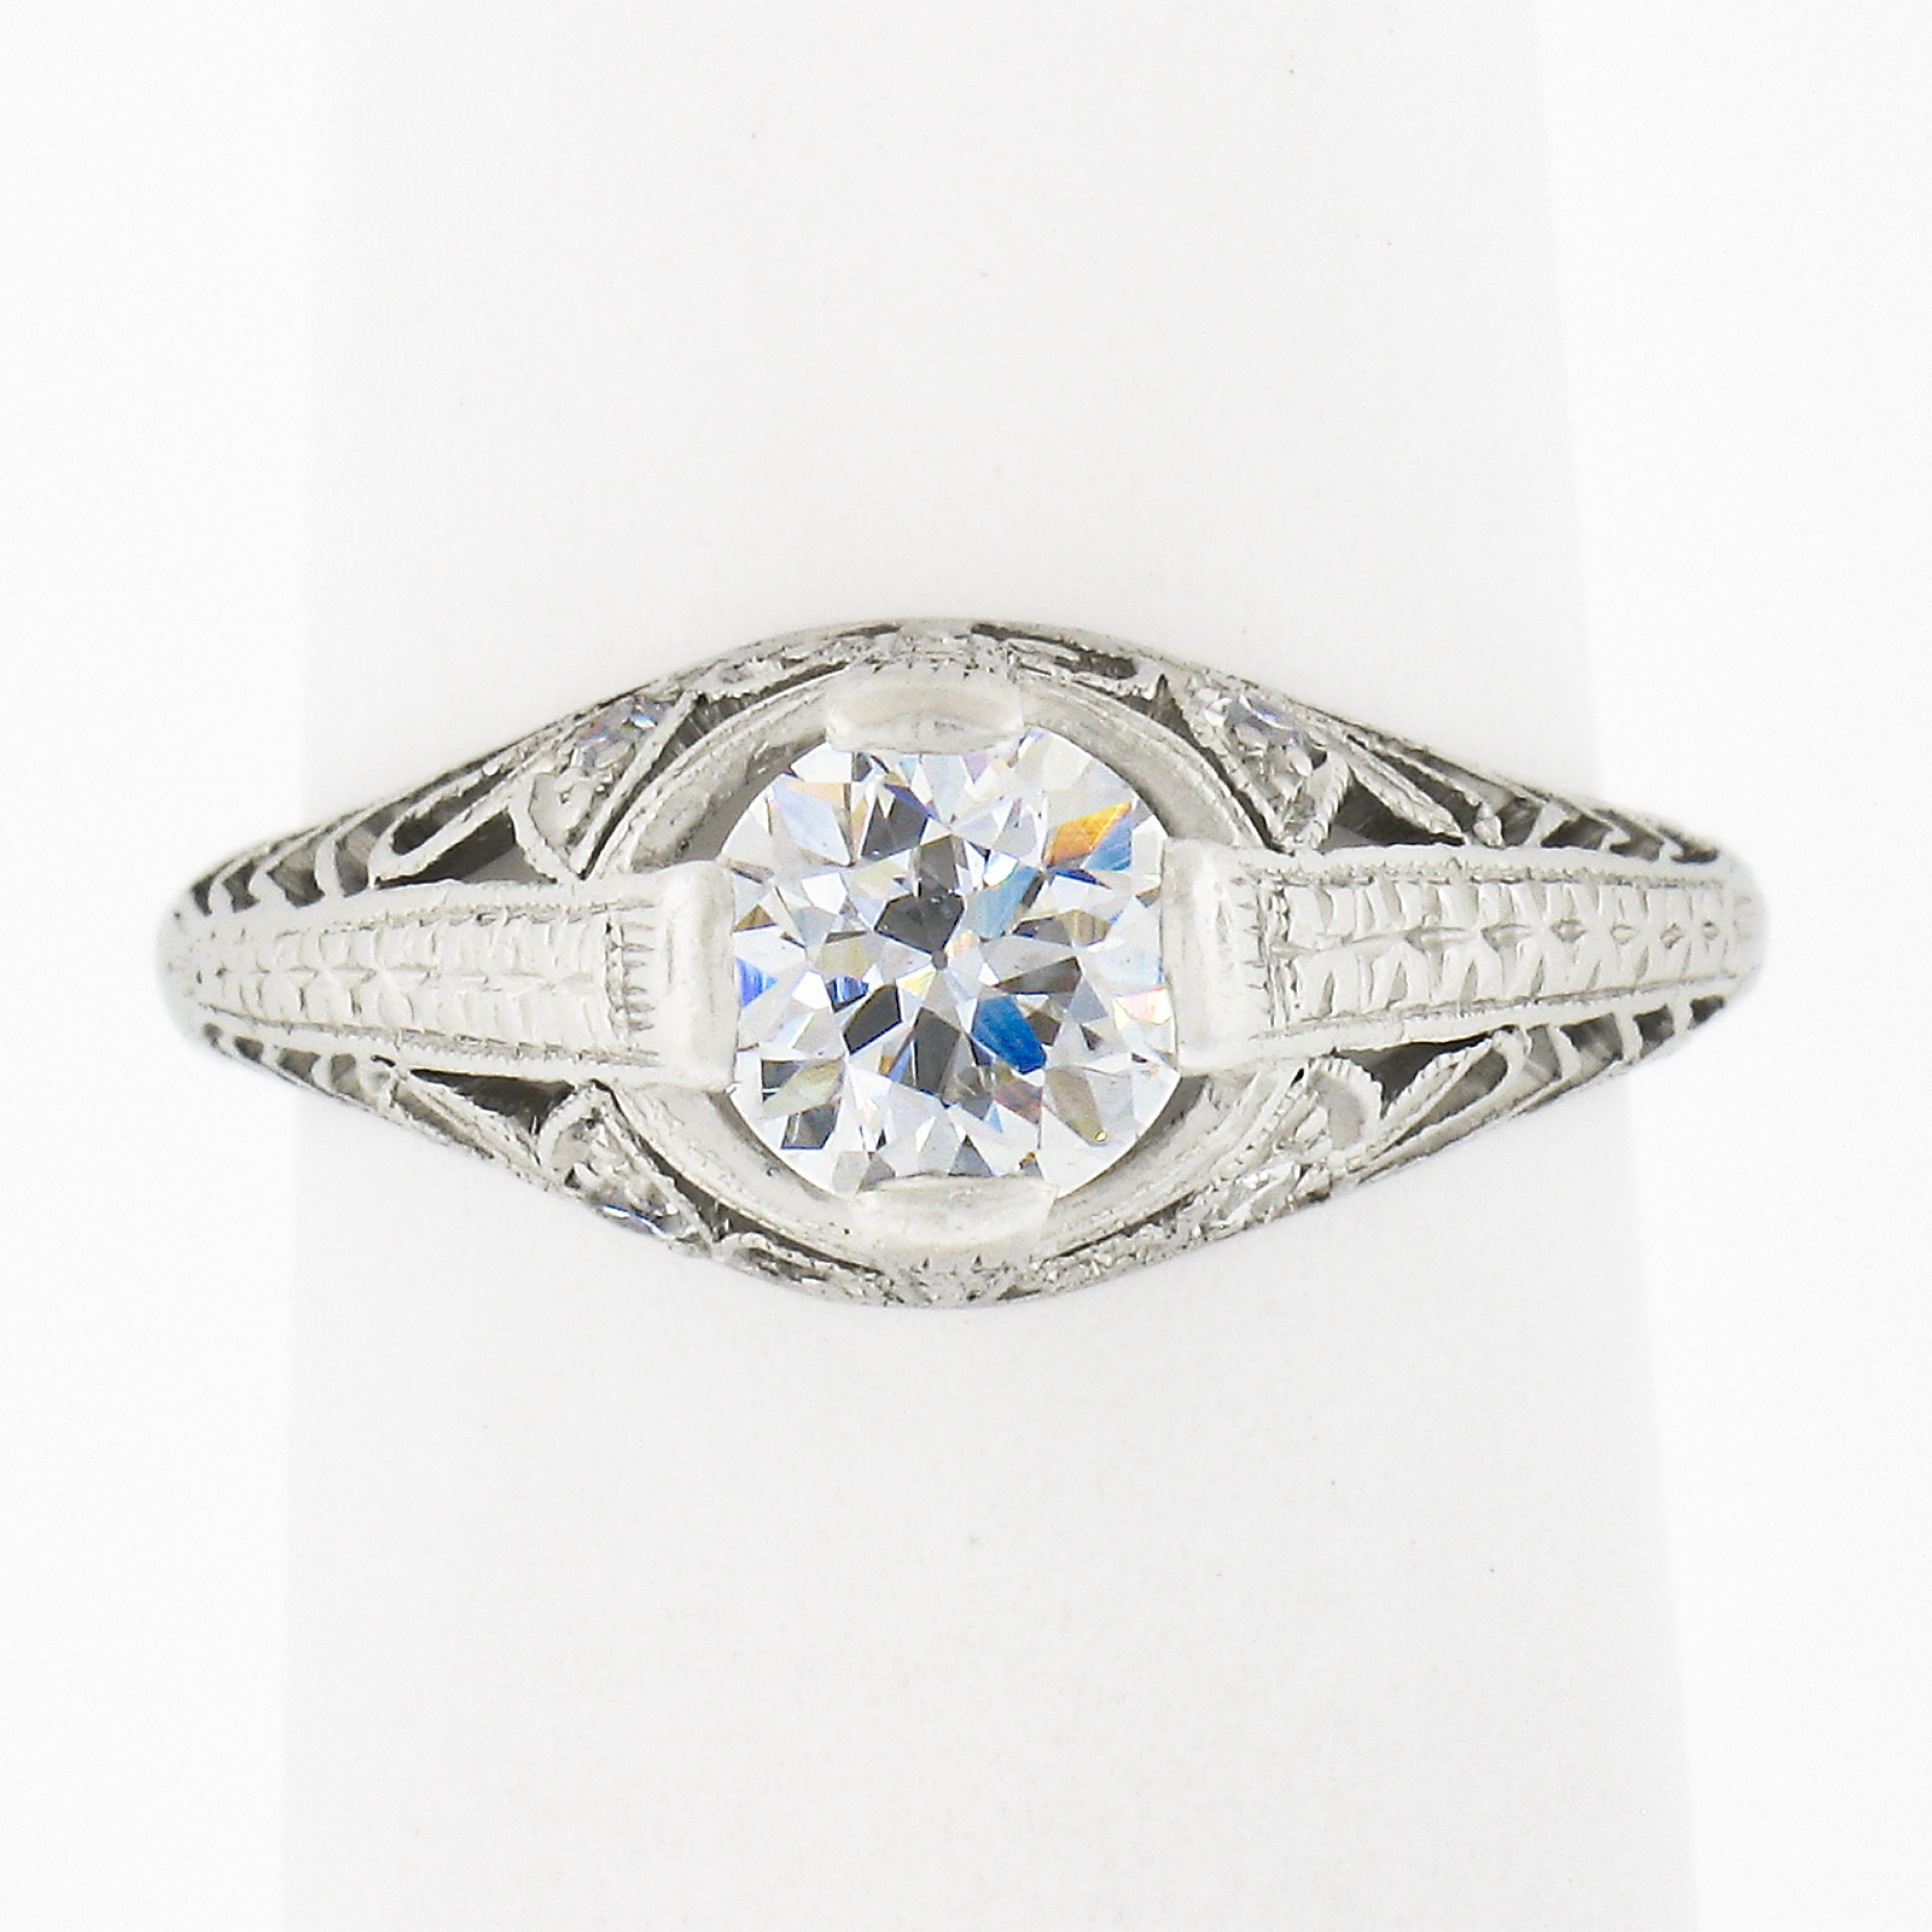 This incredible antique diamond solitaire ring was crafted in platinum during the edwardian period and features a slightly puffed top that is decorated with open filigree work and floral patterns, while the shank showcases wonderful wheat engraving